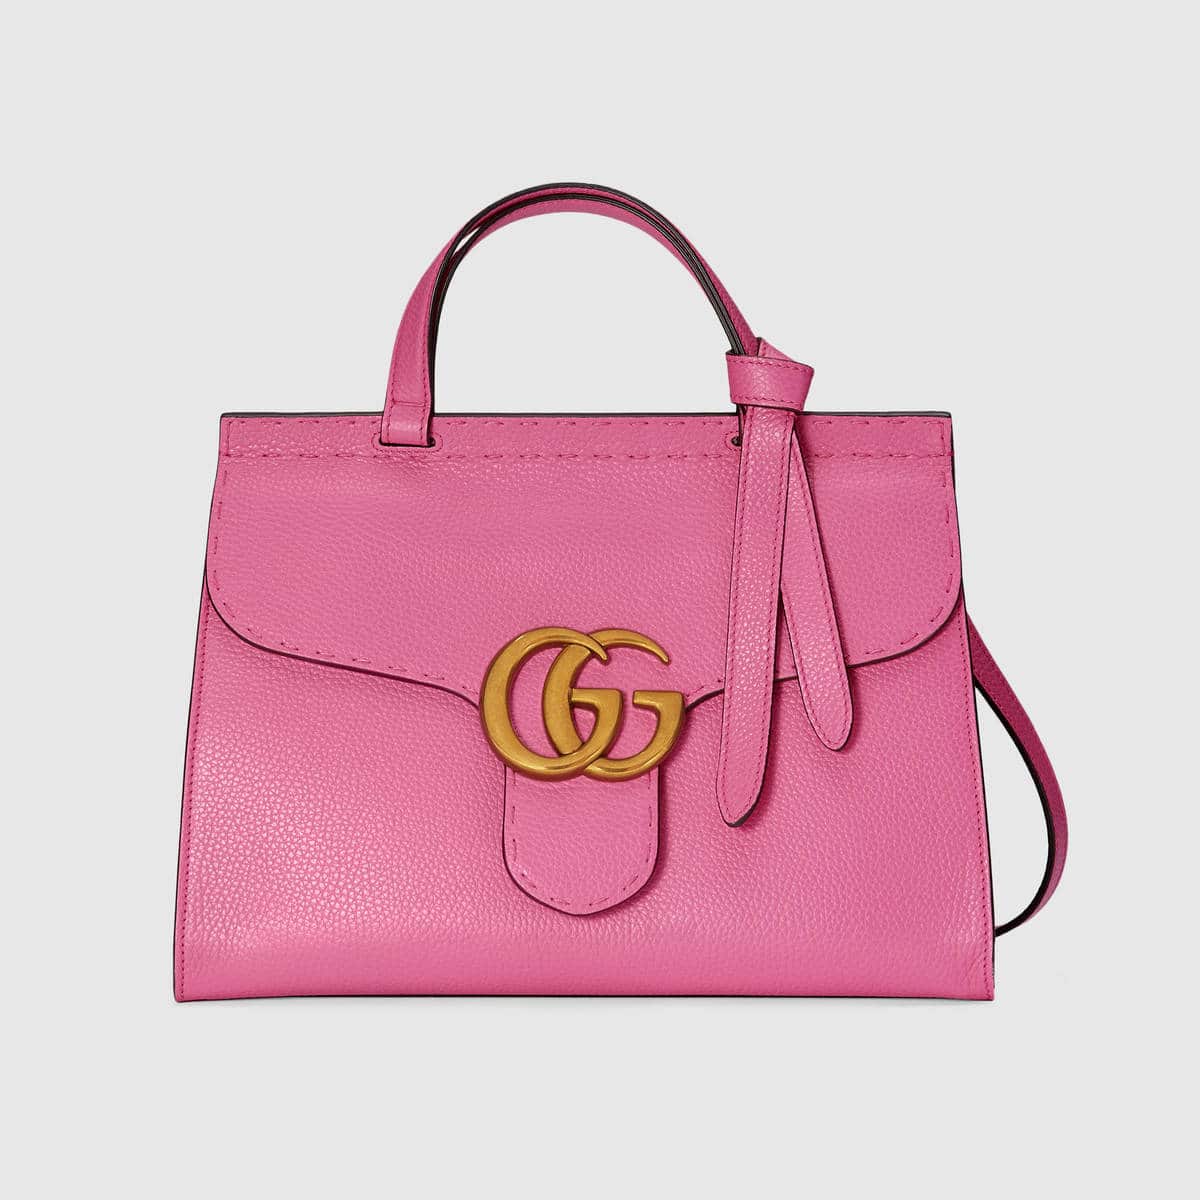 Gucci Bag Marmont Sizes The Art of Mike Mignola